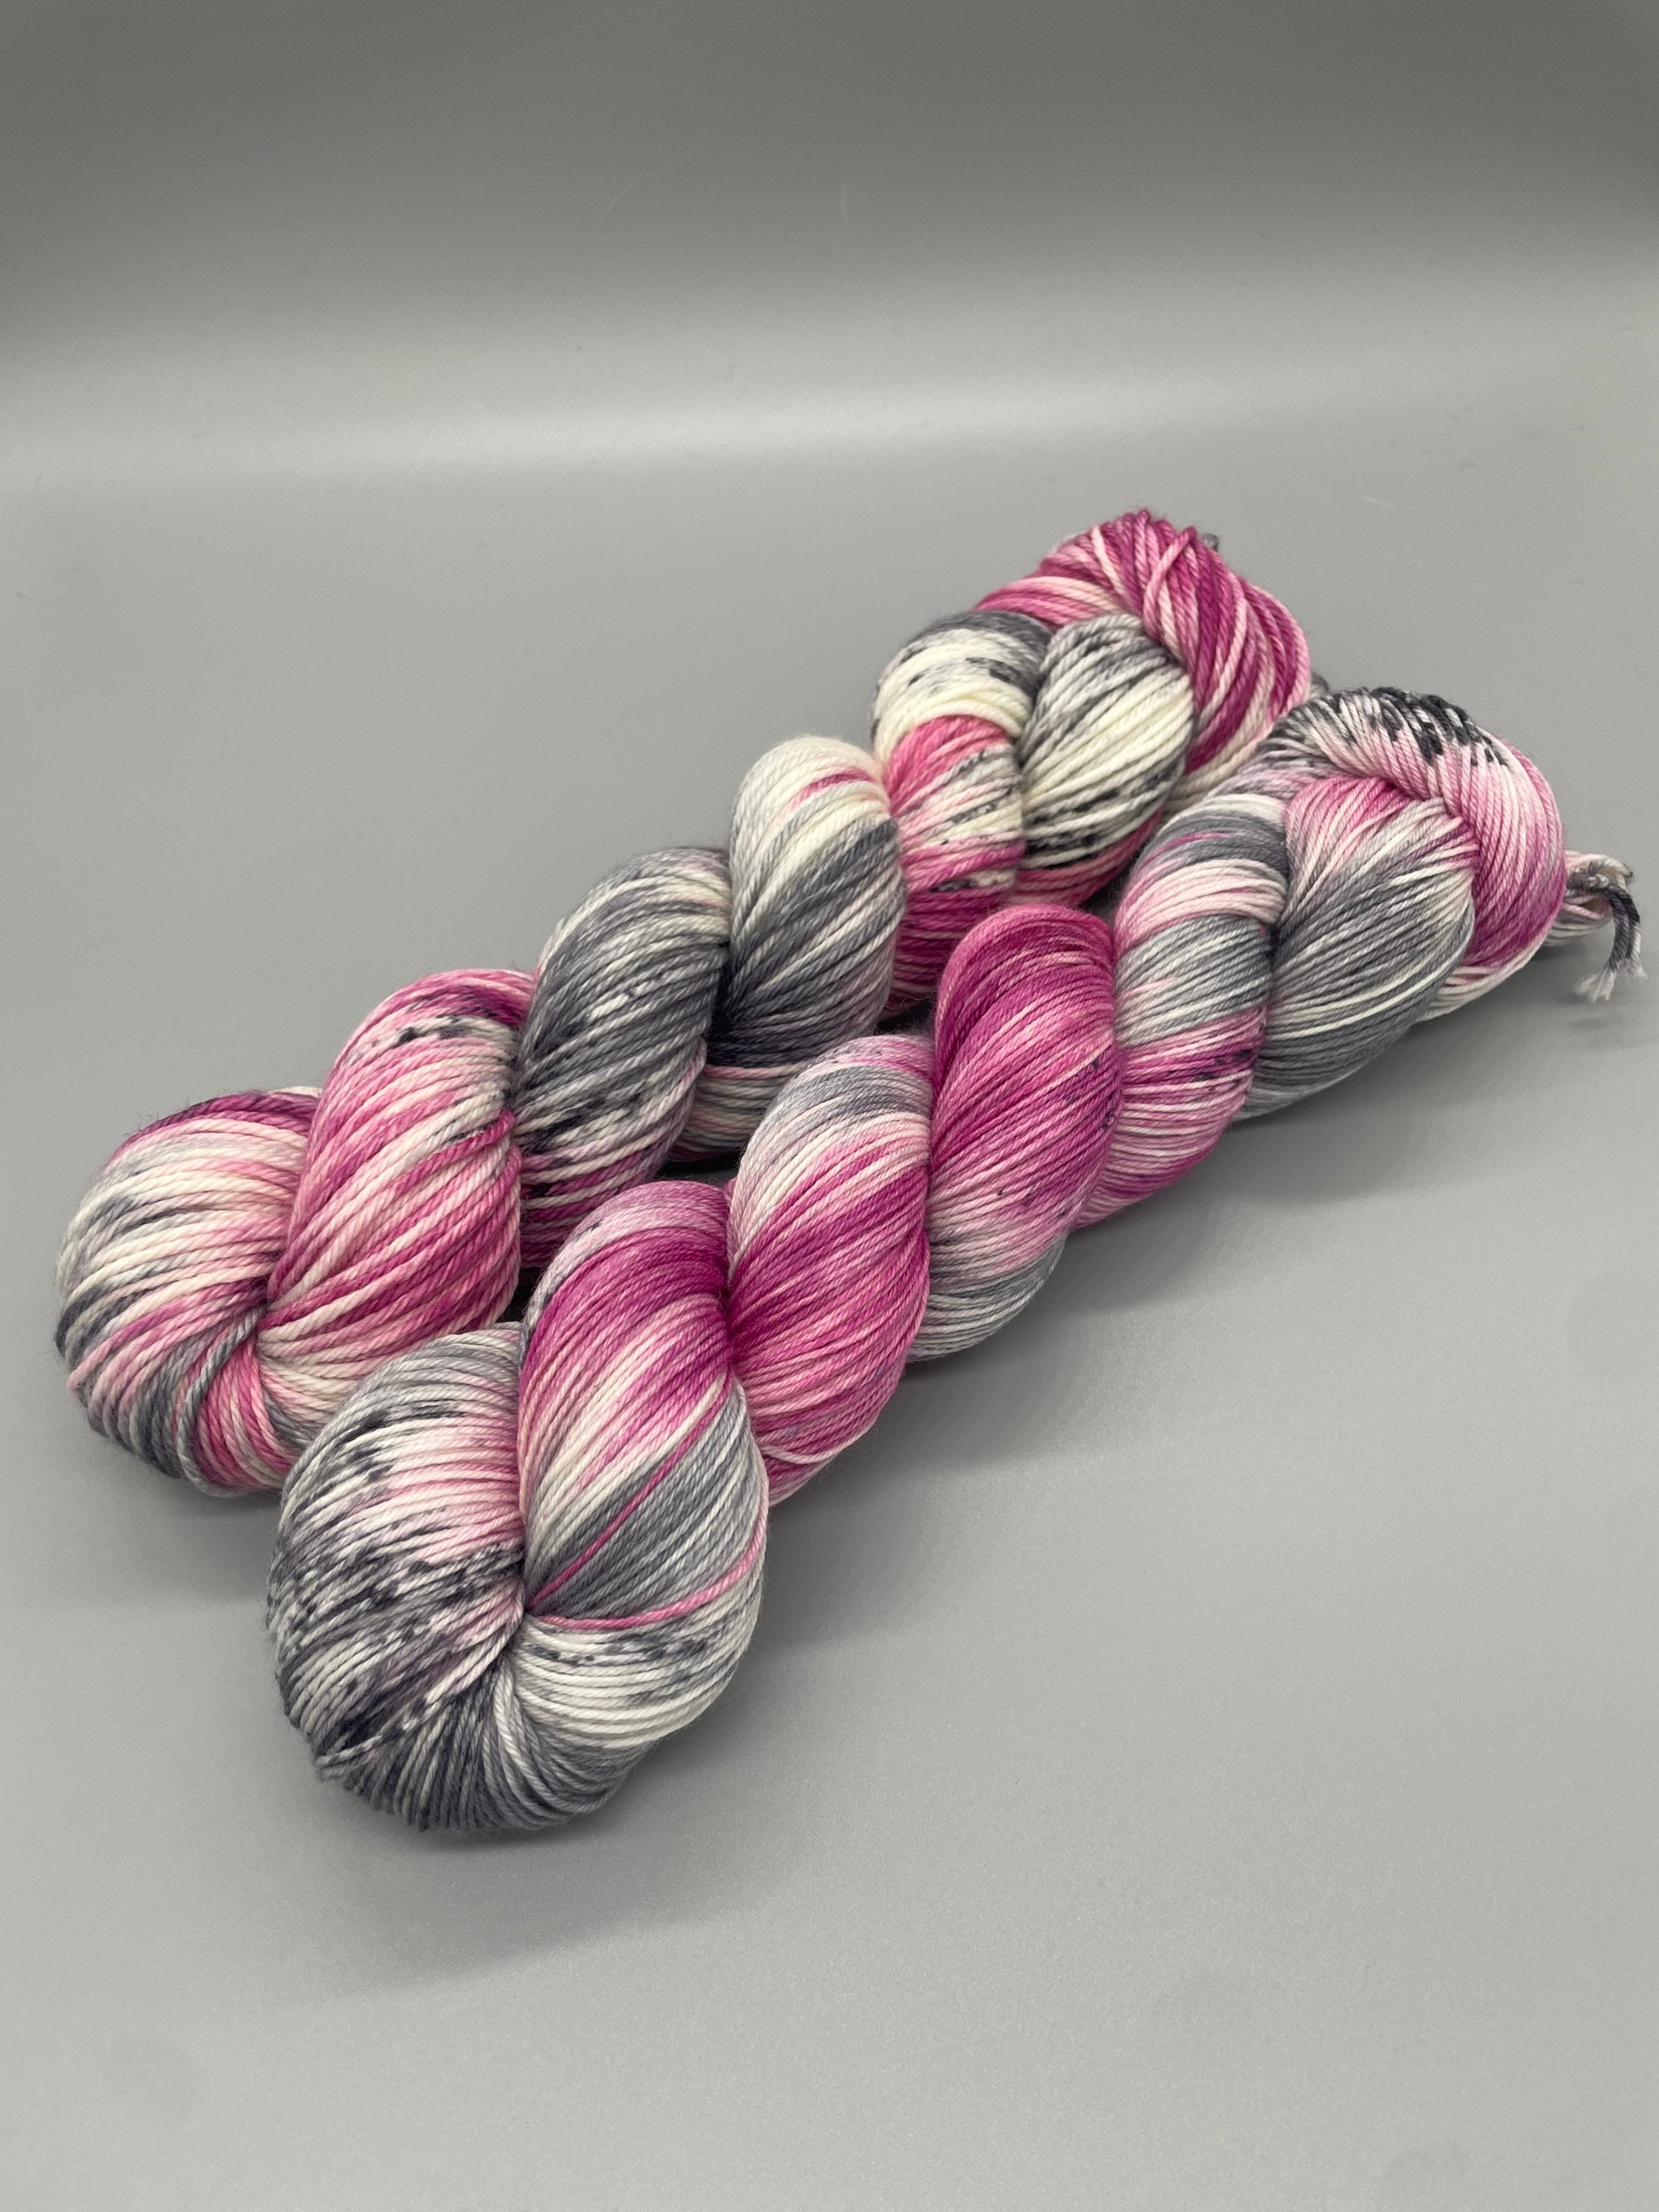 Super Fine Weight Soft and Slim Yarn Color 9916 Pin Stripe Grey - BambooMN - 2 Skeins, Gray